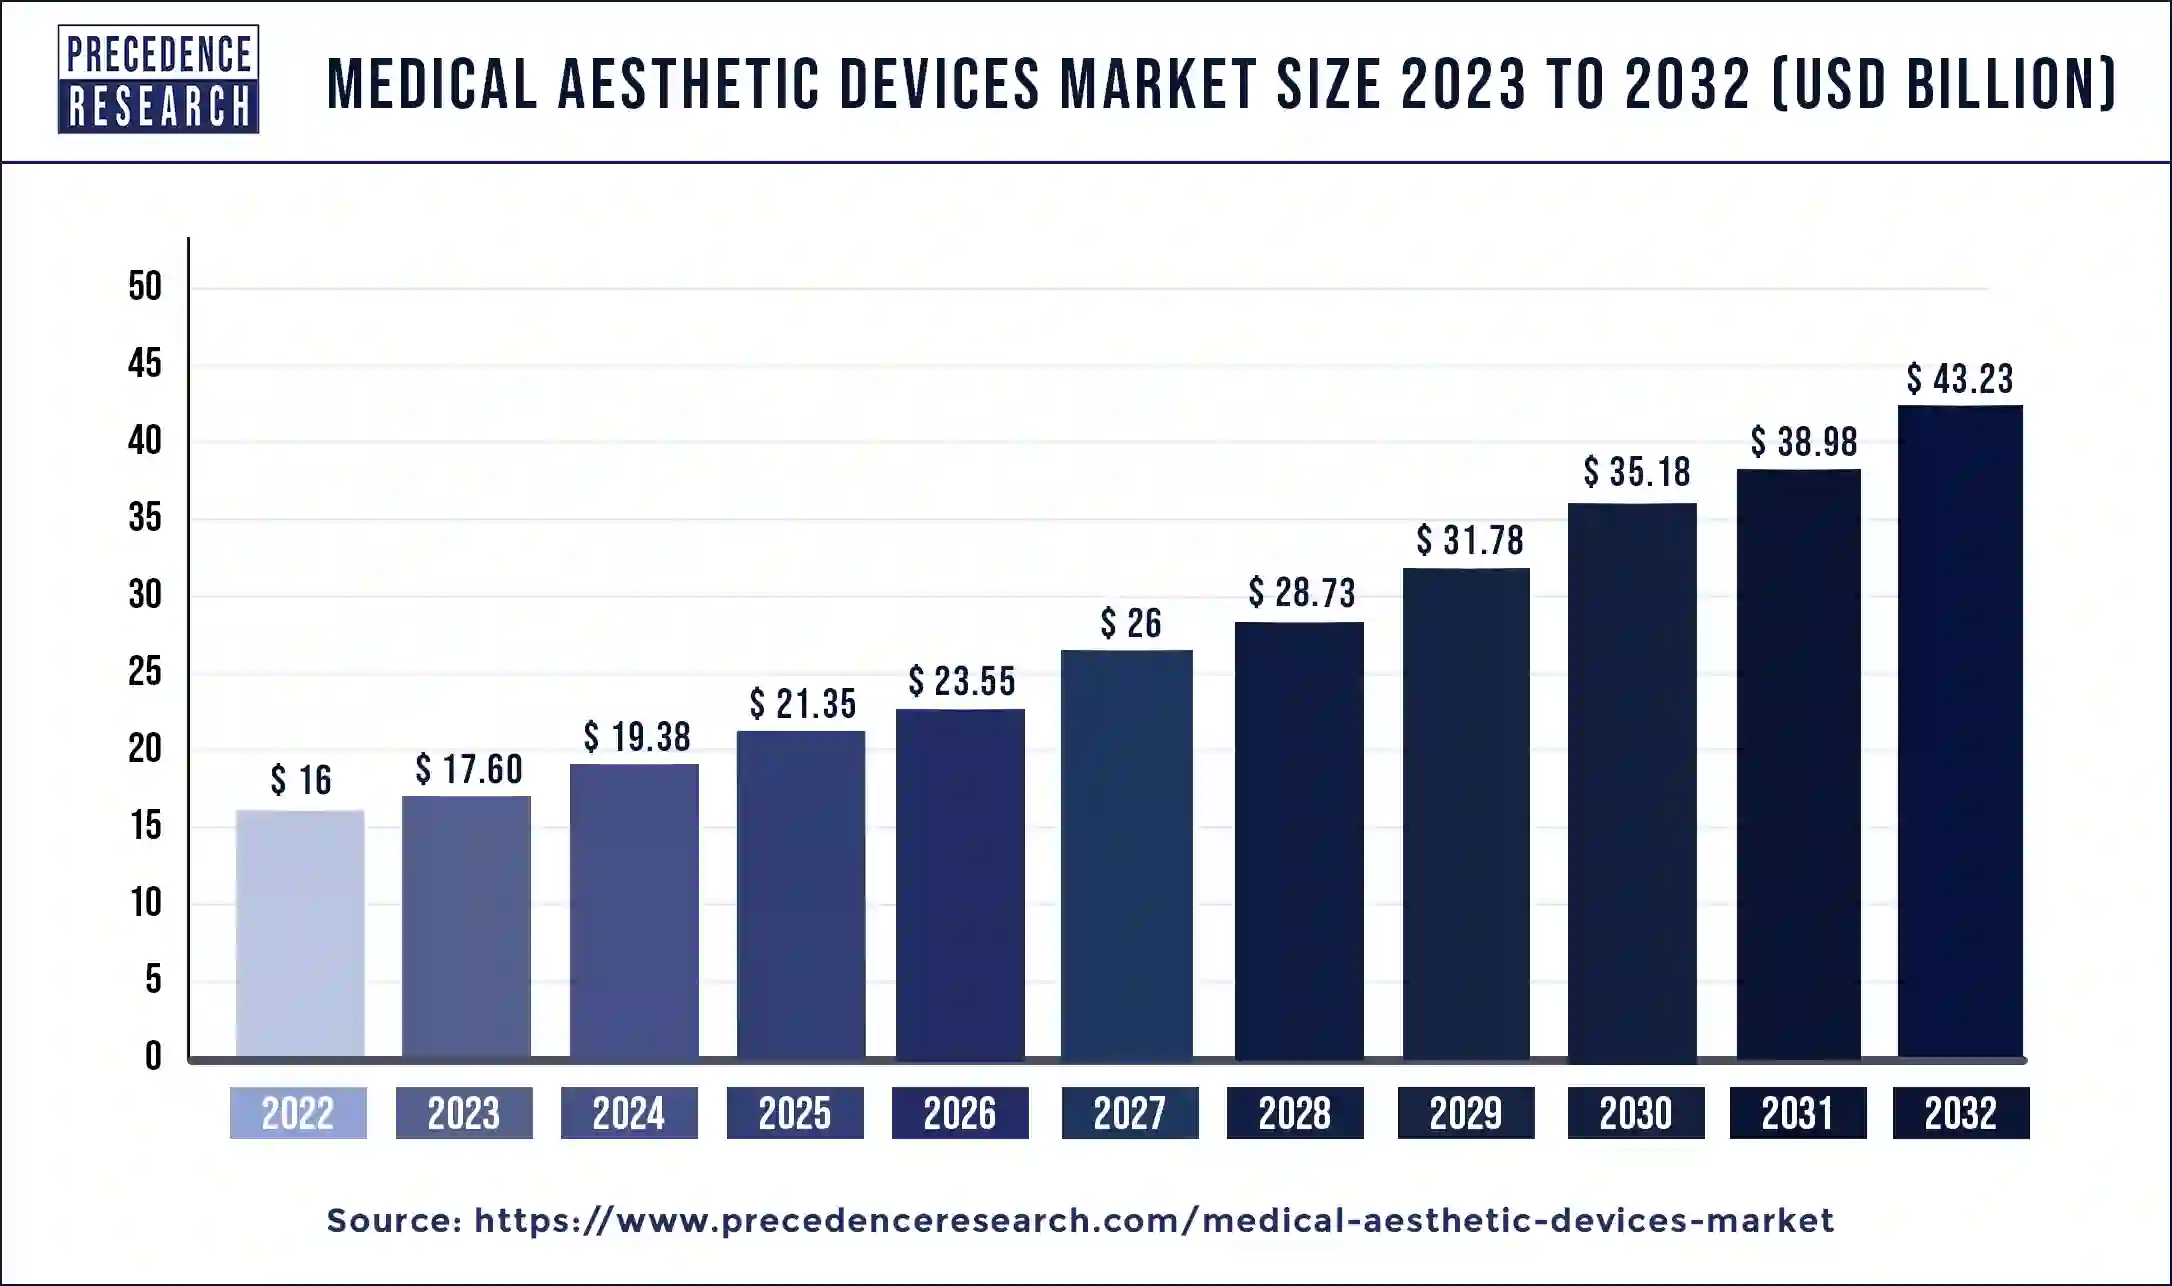 Medical Aesthetic Devices Market Size 2023 to 2032